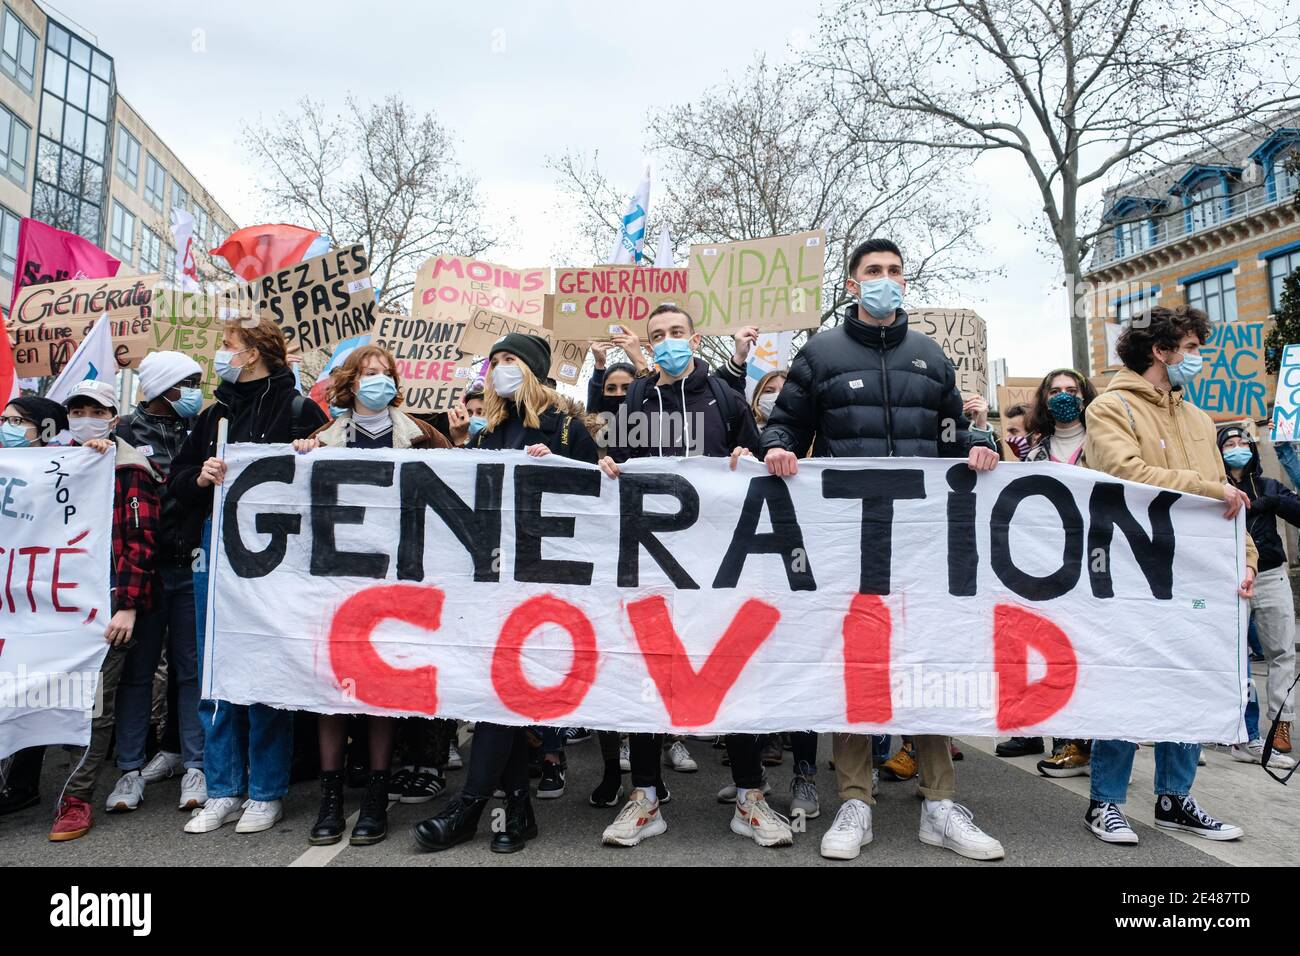 Lyon (France), 21 January 2021. Students demonstrated in the streets of Lyon. They denounced the distress, the isolation and the precariousness of the Stock Photo